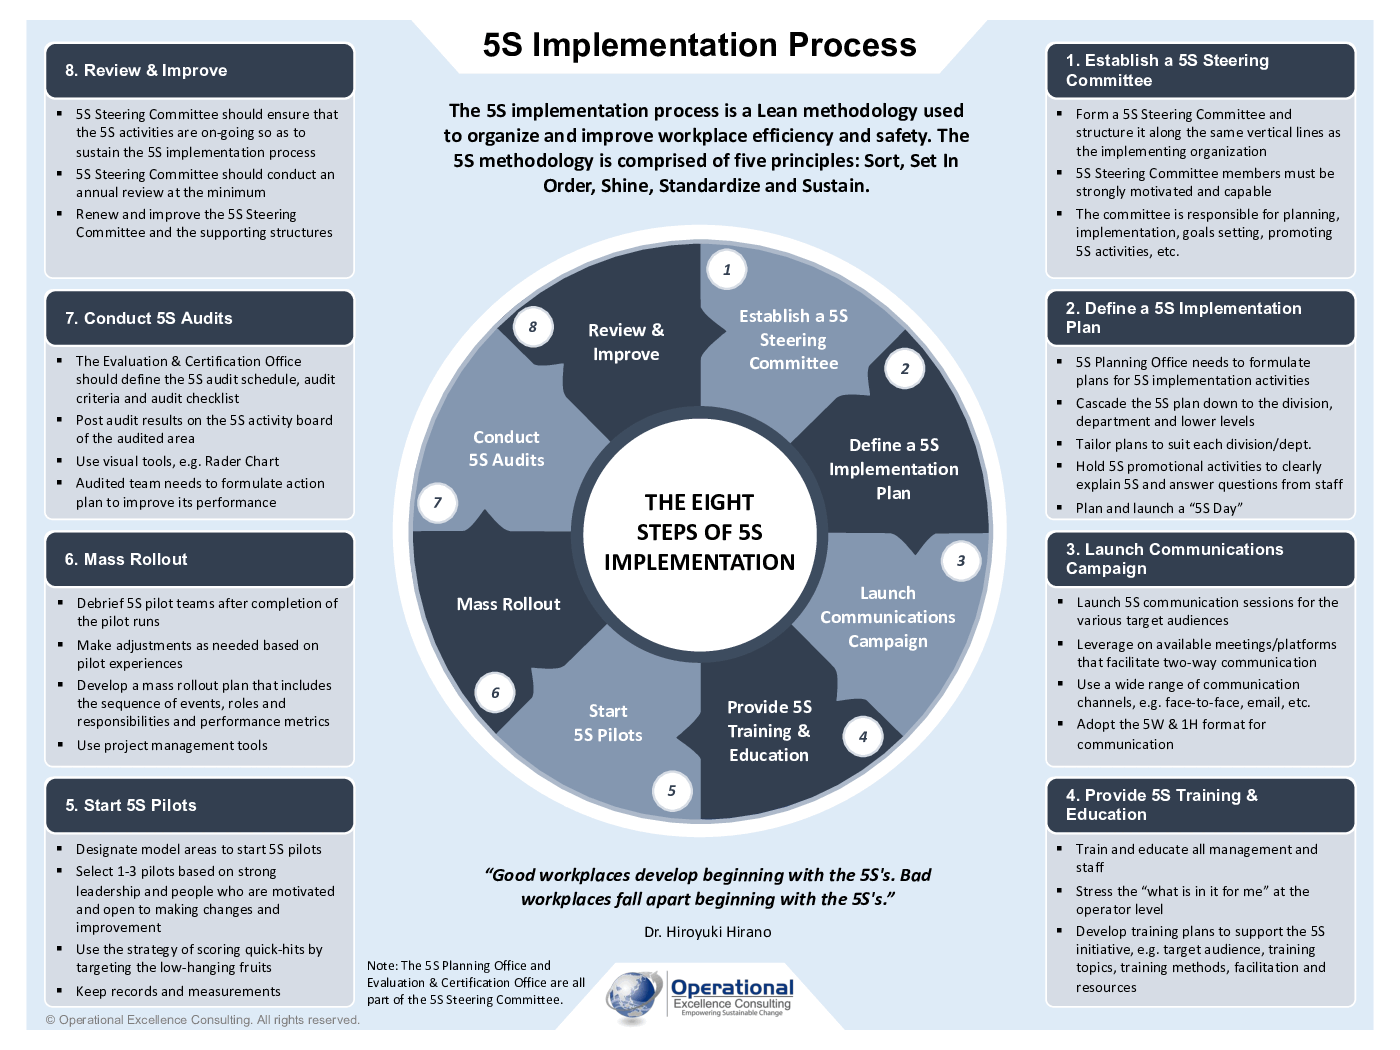 5S Implementation Process Poster